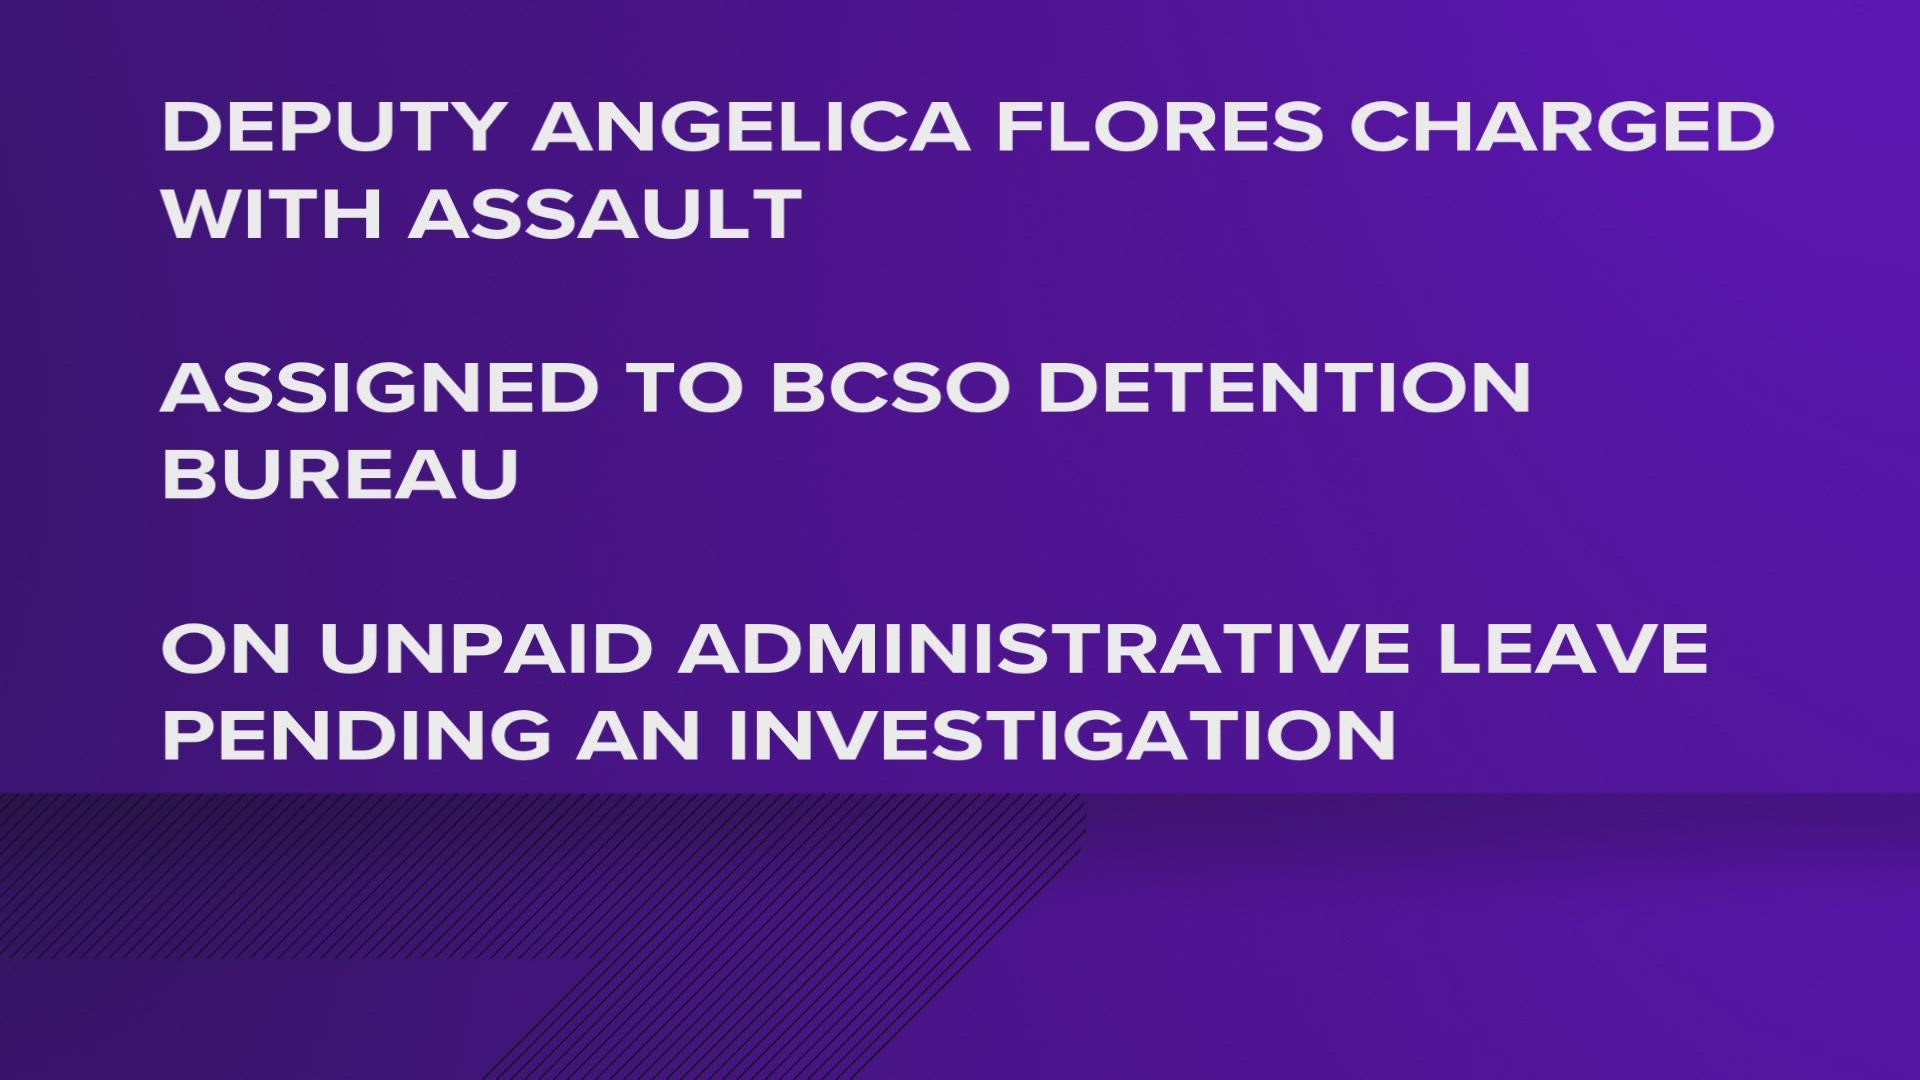 Angelica Flores reportedly started a fight with her partner that became physical and she elbowed him in the face.